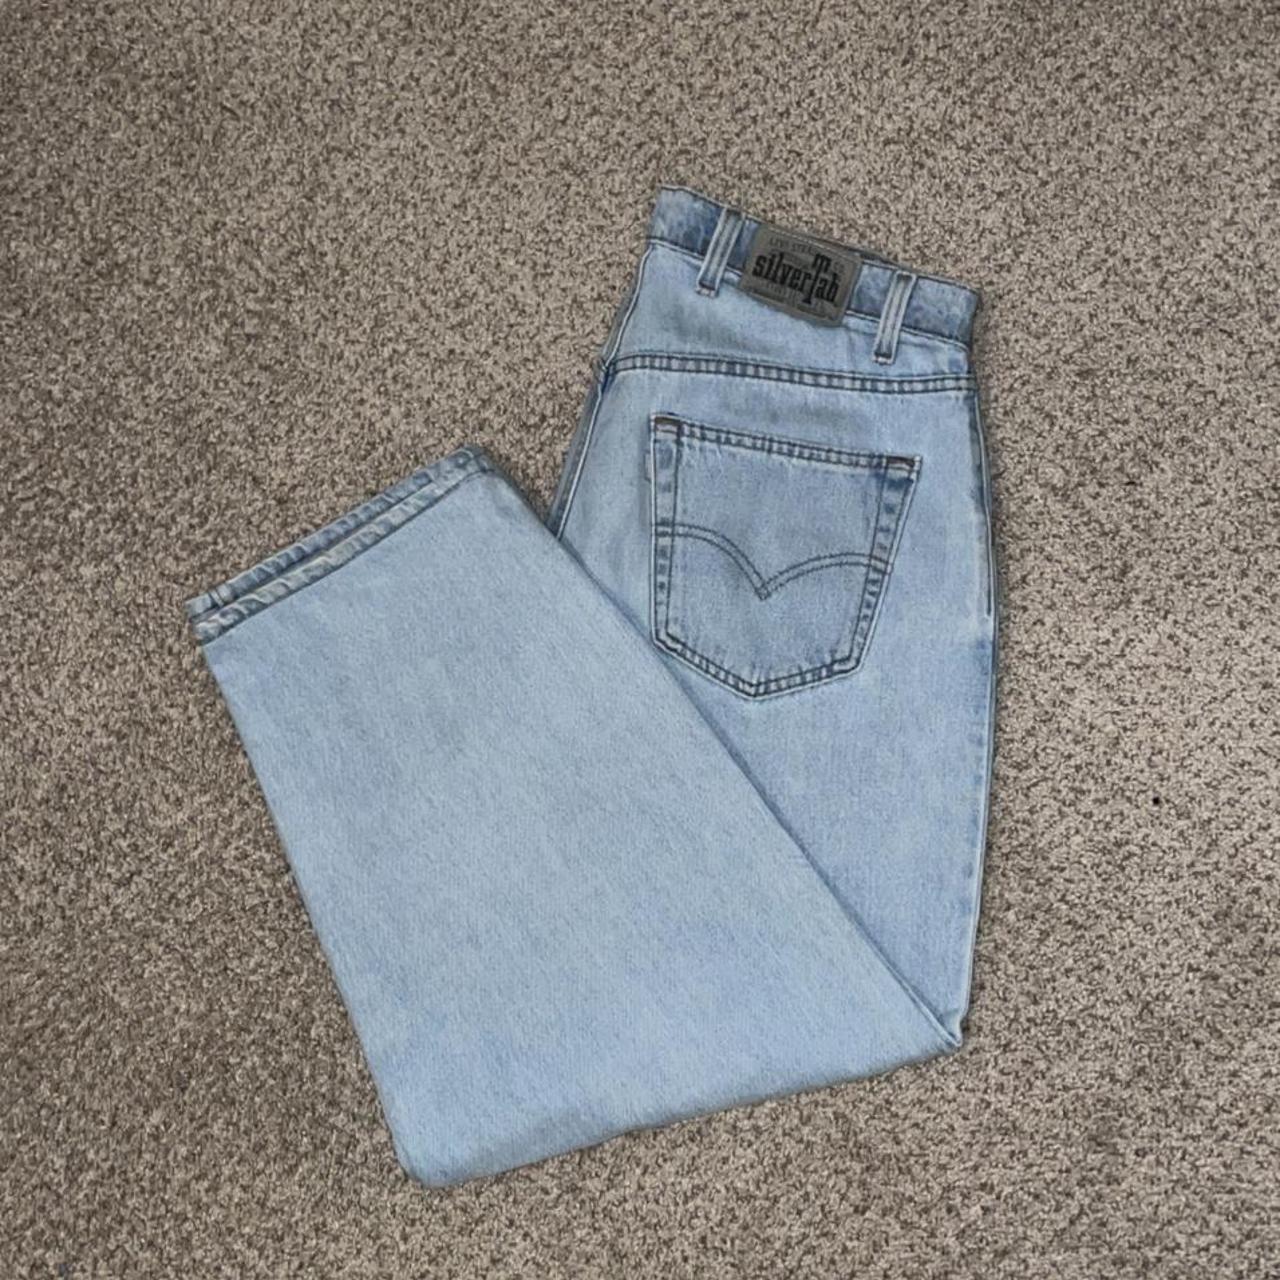 Product Image 2 - -Levi’s silvertab “baggy” jeans from